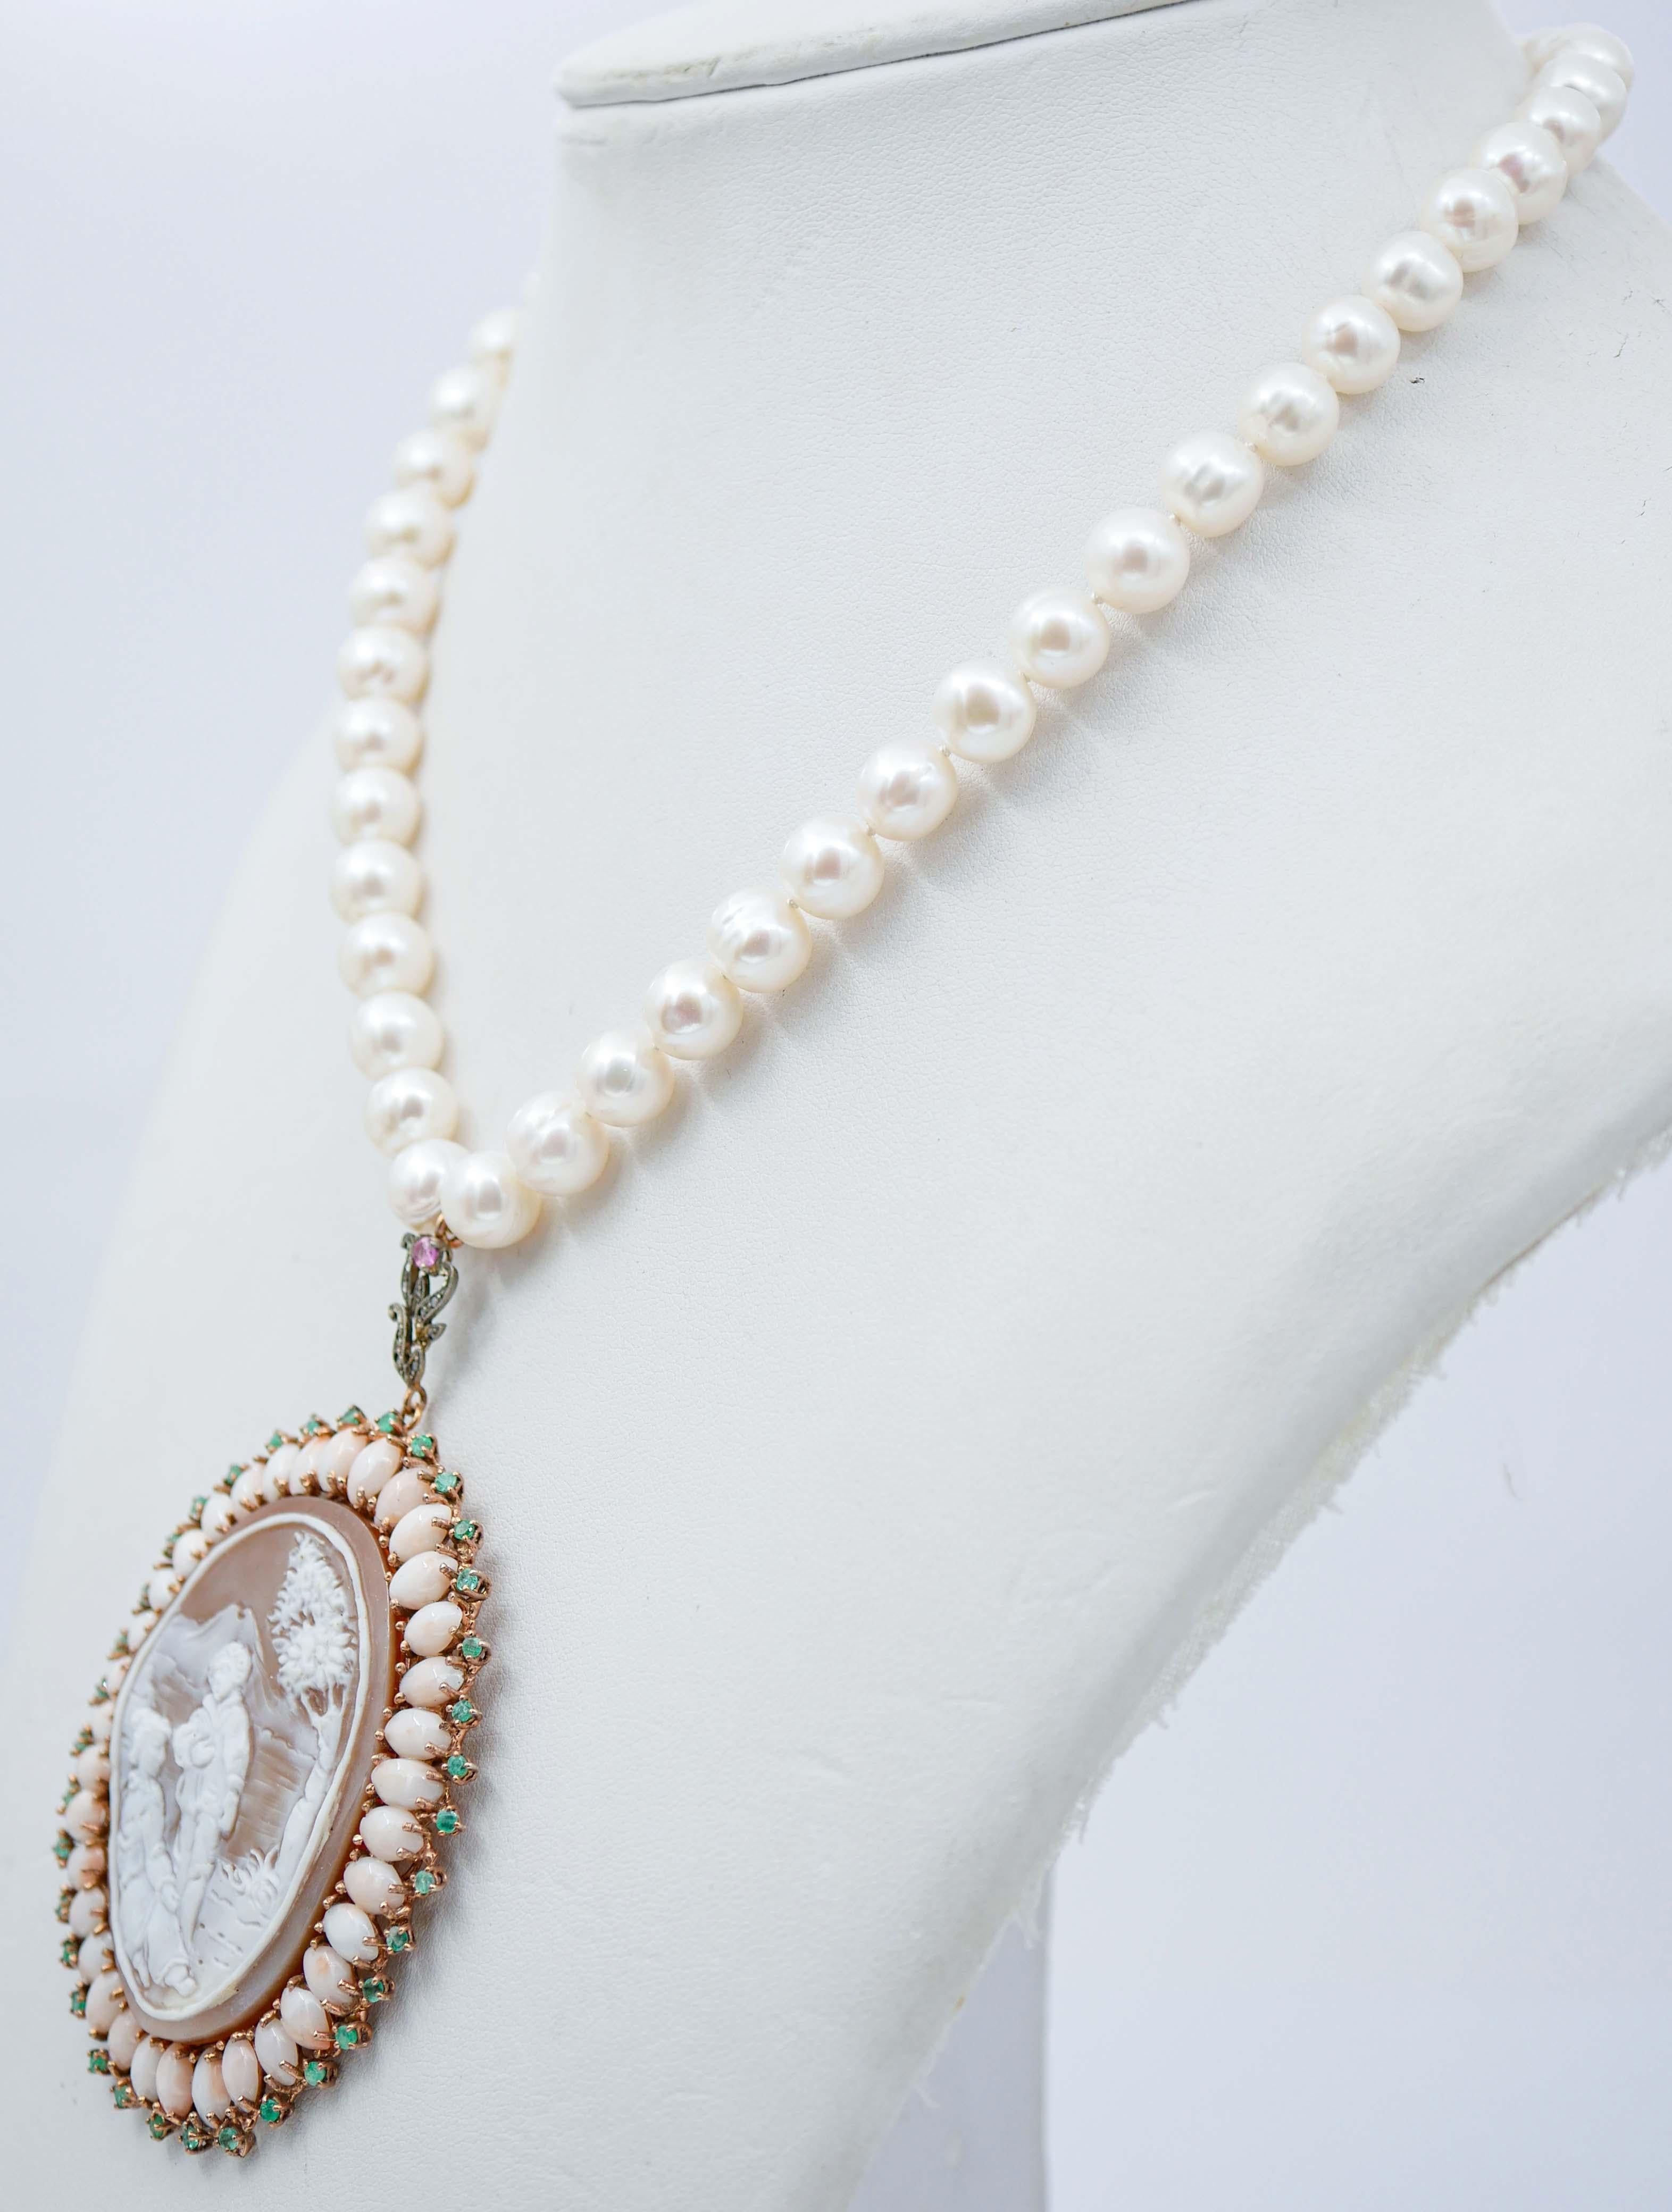 Retro Coral, Pearls, Diamonds, Rubies, Emeralds, Cameo, Rose Gold and Silver Necklace